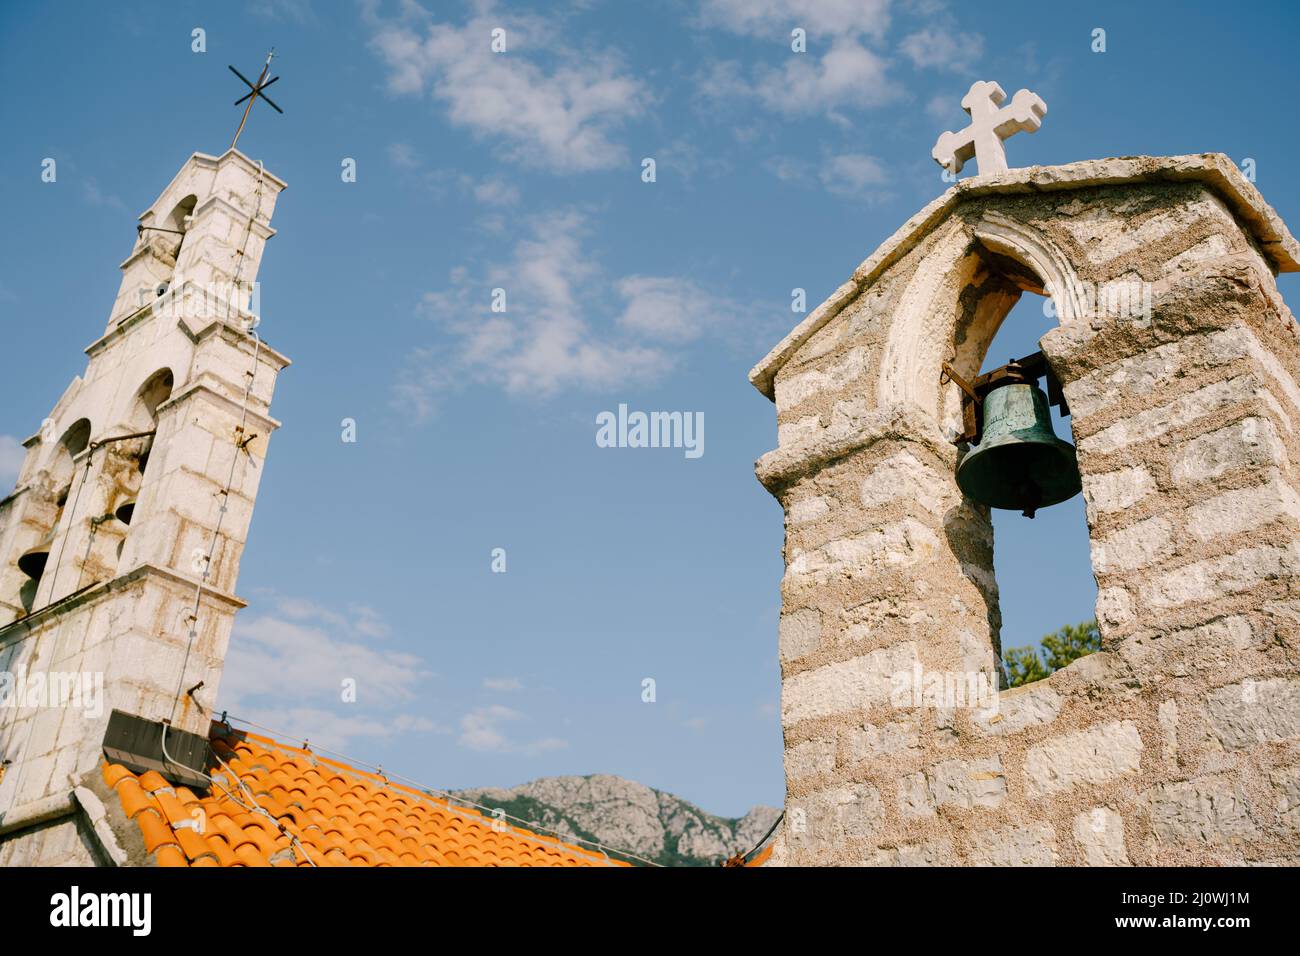 Two old stone bell towers with bells against the sky Stock Photo